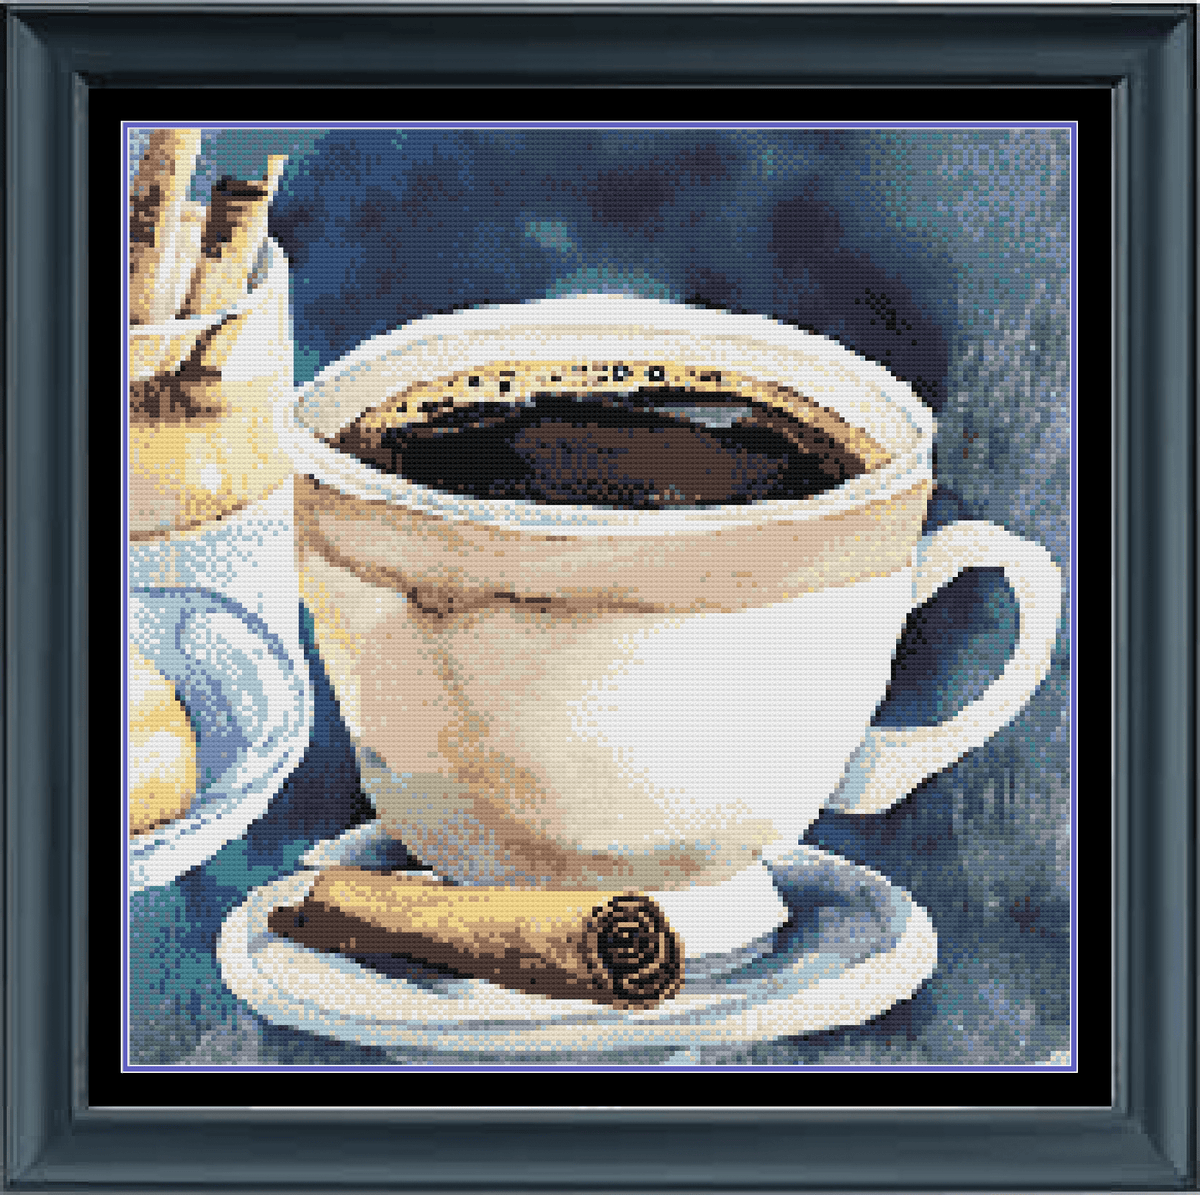 Stitching Jules Design Cross Stitch Pattern Cup Of Coffee Morning Brew Cross Stitch Embroidery Needlepoint Pattern PDF Download - Ready For Pattern Keeper